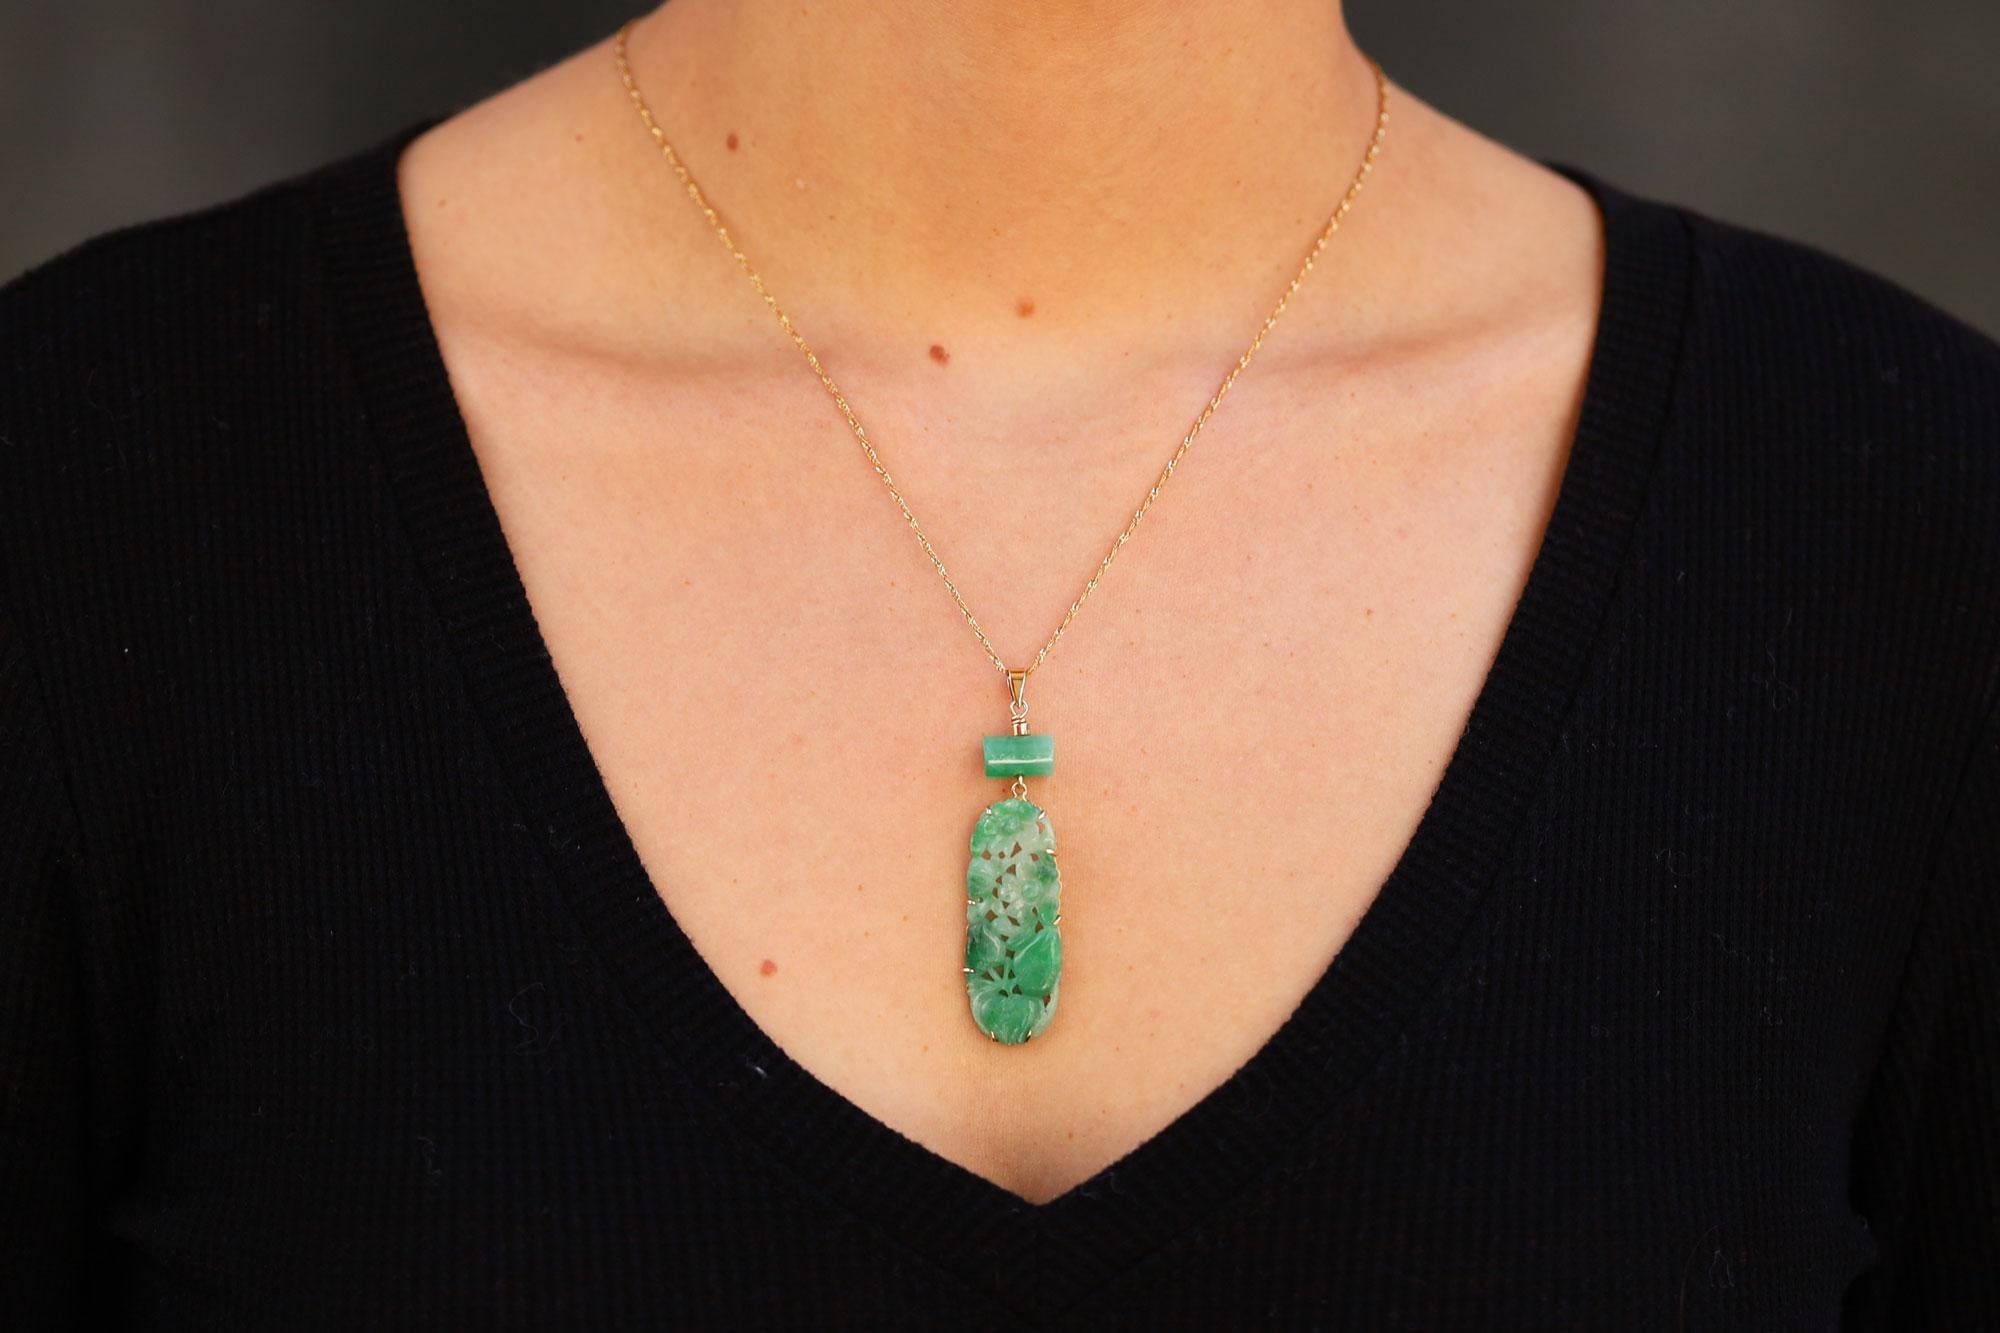 The central natural jadeite jade in this delightful drop necklace boasts a vibrant, mottled green color in an undulating oval carving. The piercings allowed their Chinese owners to sew these amulets on clothing to boast their status and wealth as